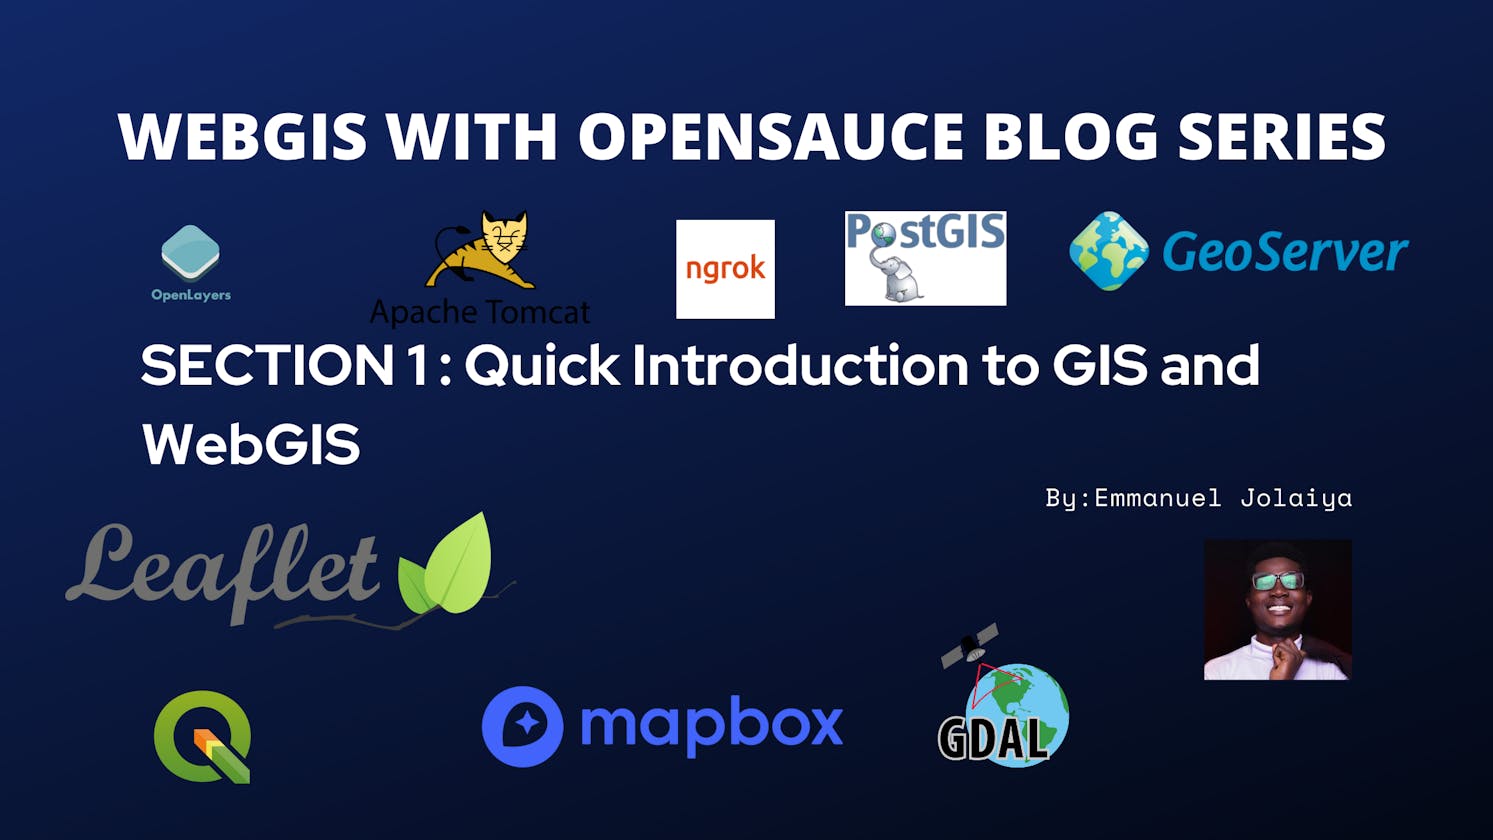 SECTION 1: Quick Introduction To GIS And WebGIS